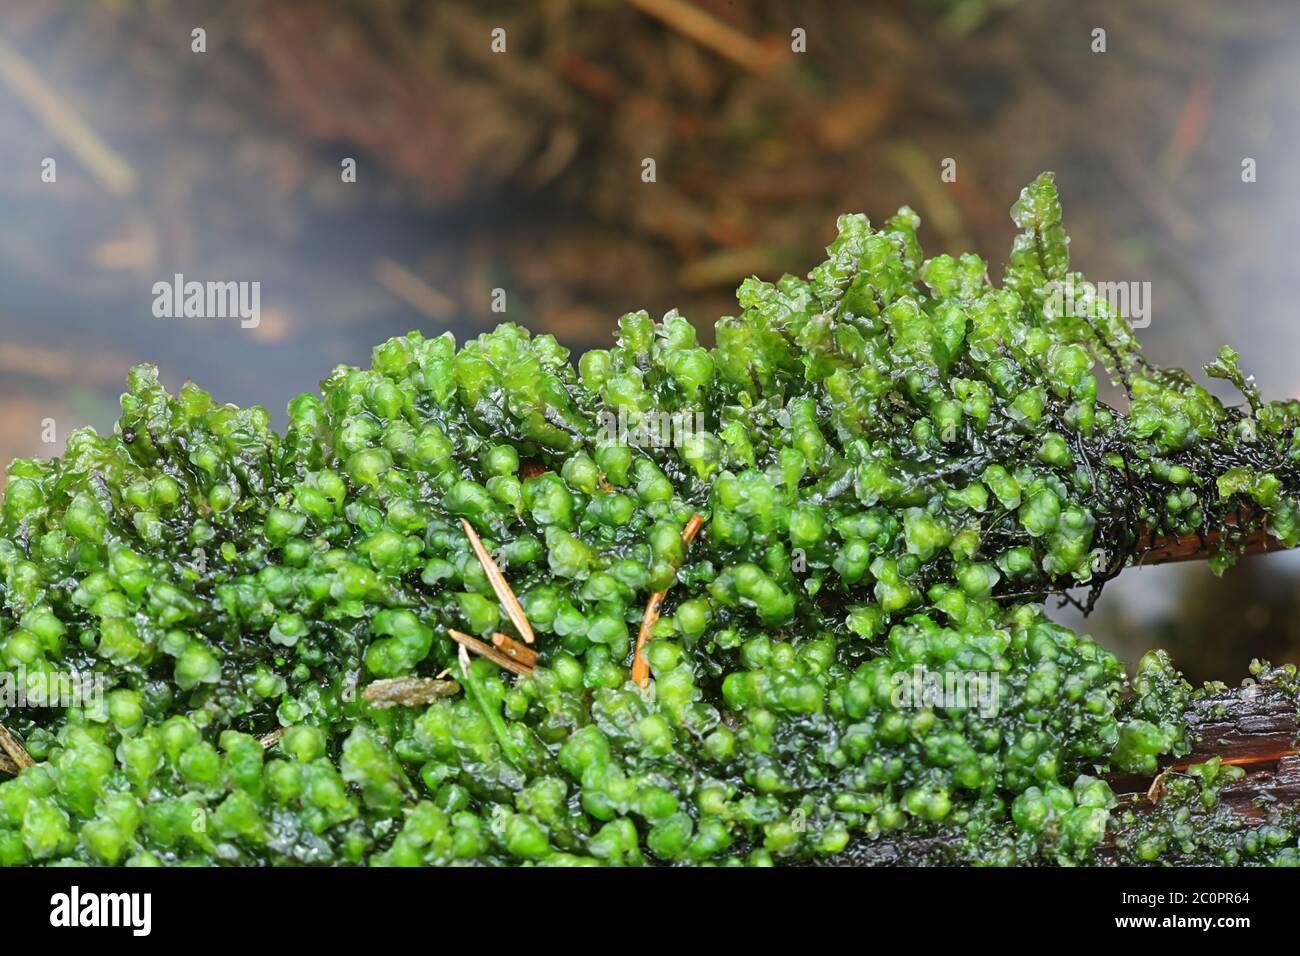 Scapania undulata, the Water Earwort, a liverwort growing on forest streams in Finland Stock Photo